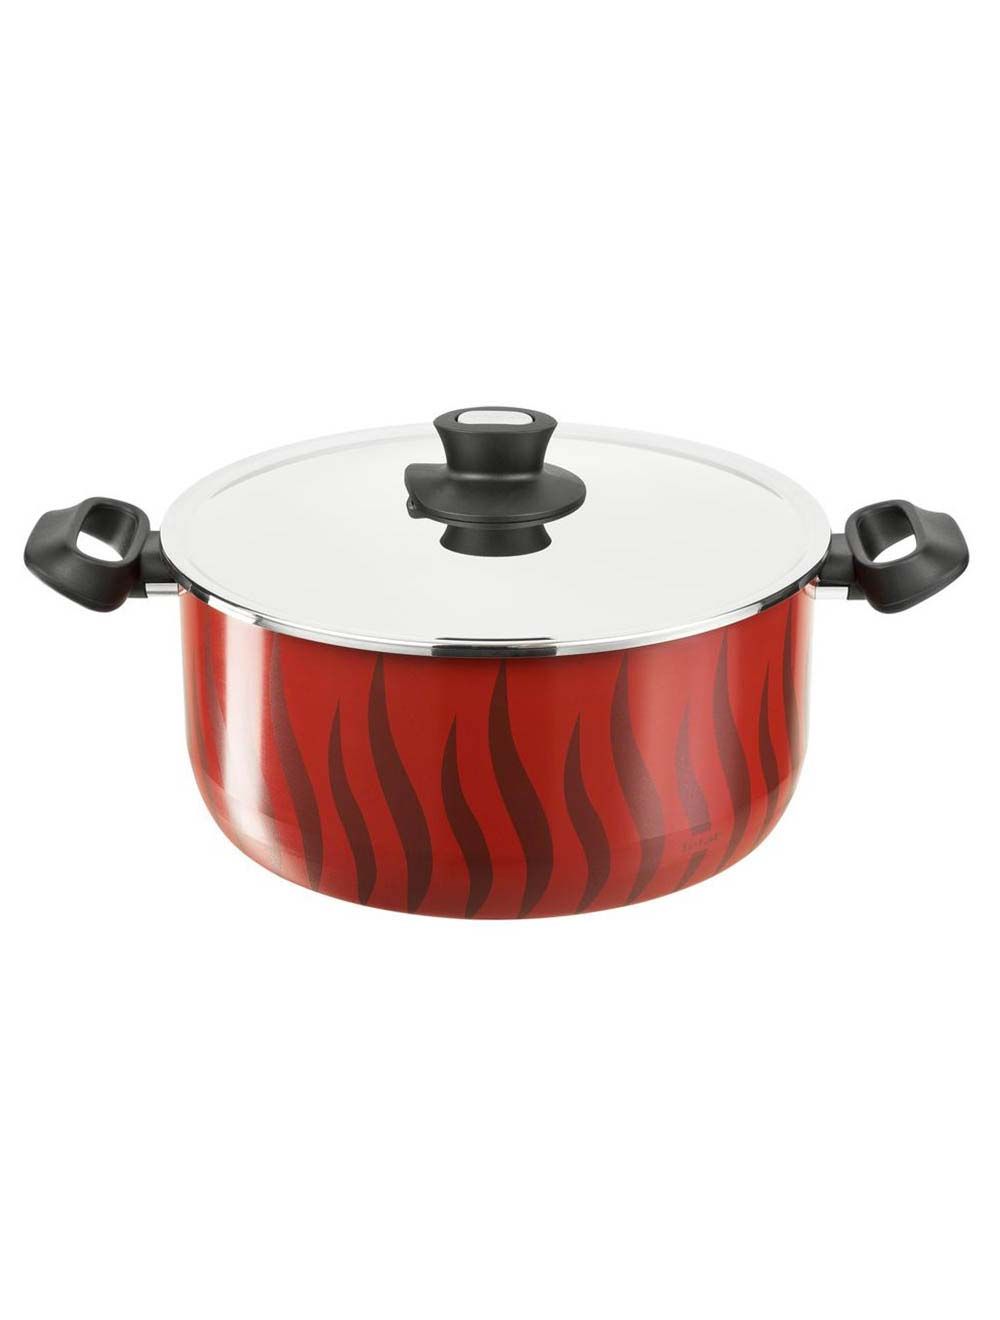 Tefal Tempo Casserole with Glass Lid 28 cm, C5485382